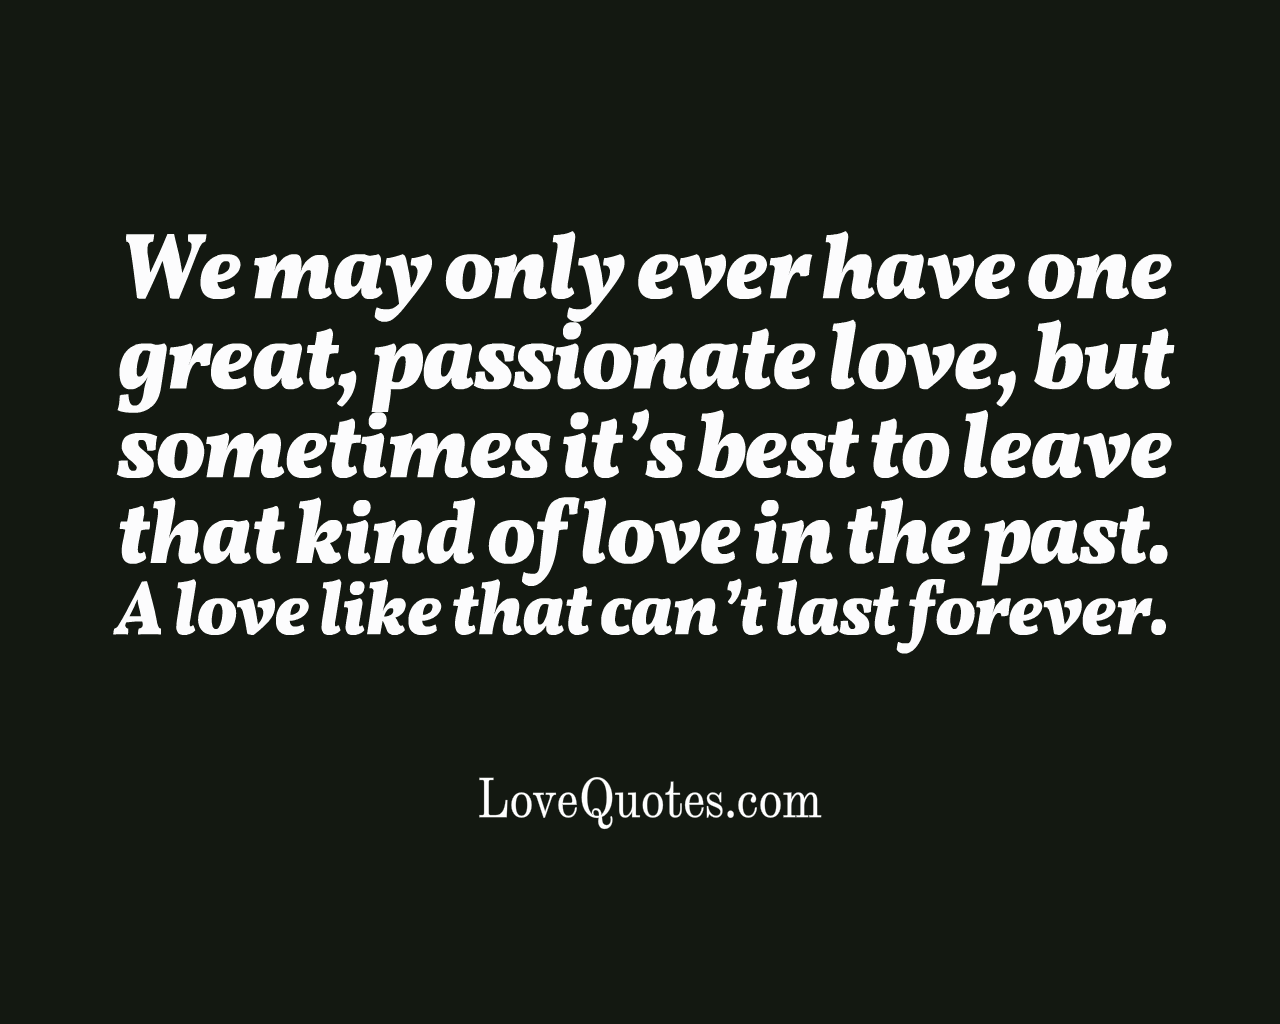 One Great Love - Love Quotes